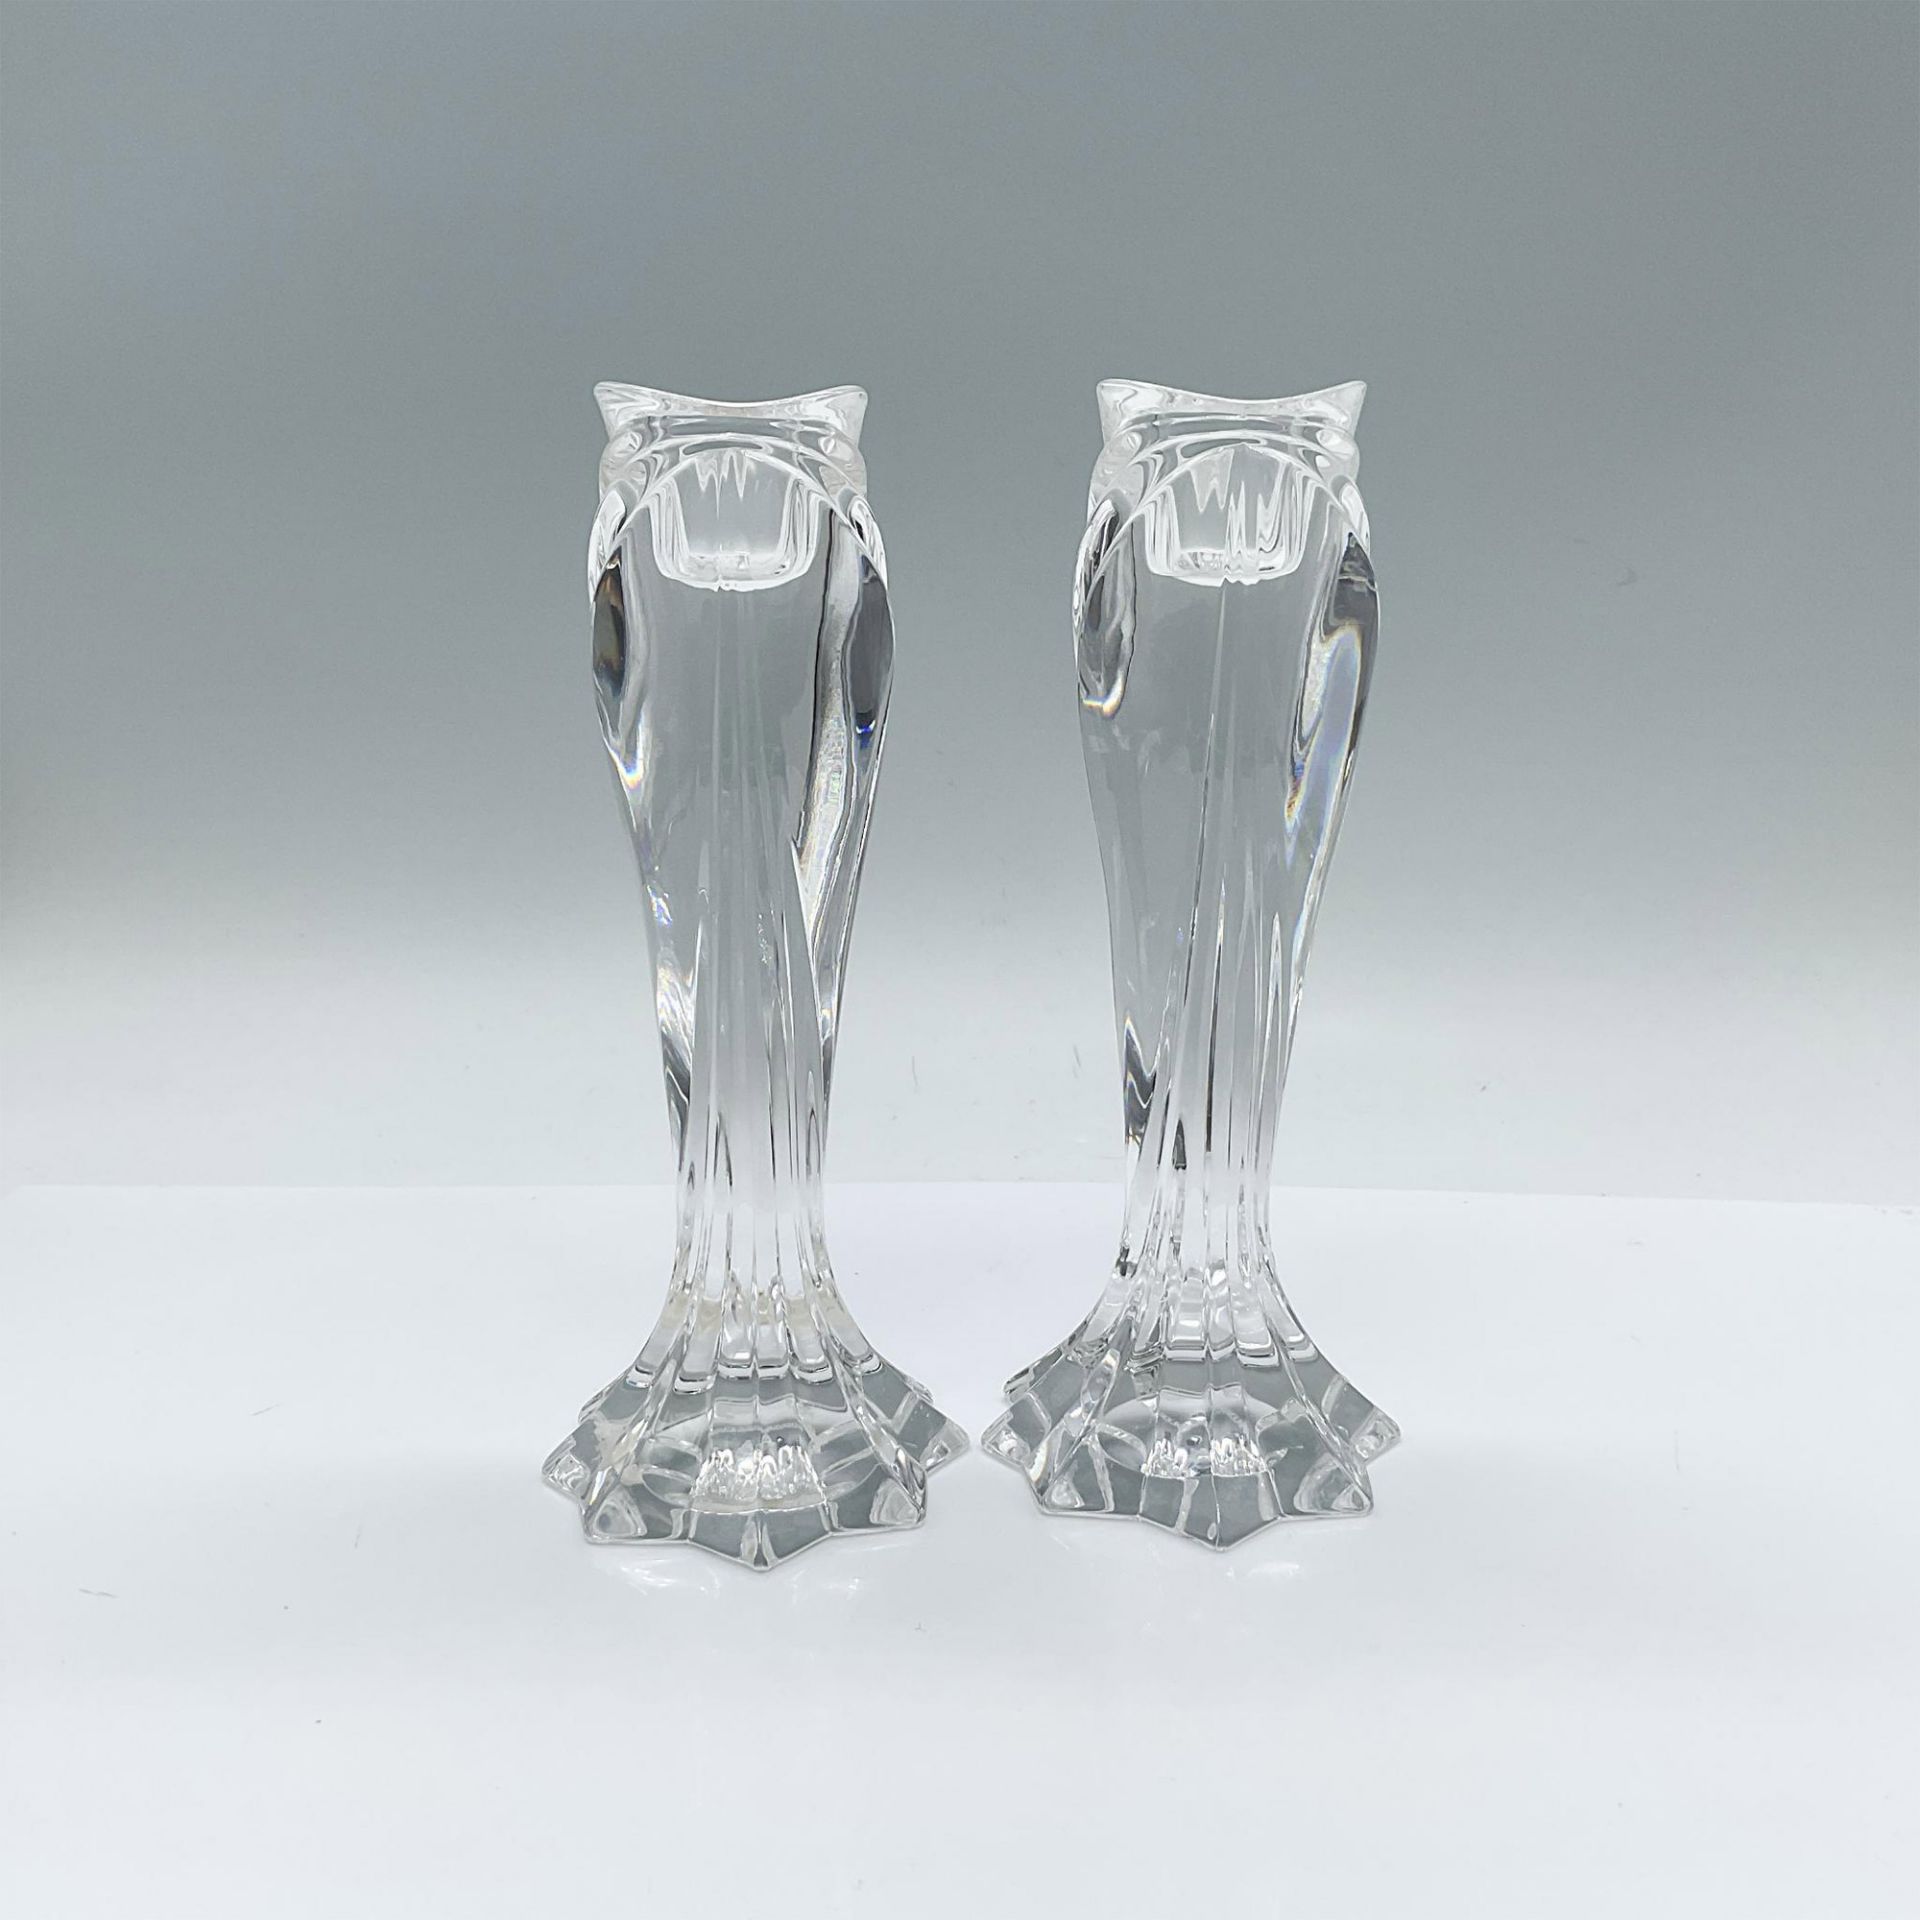 Pair of Lenox Glass Candlestick Holders, Artic Bloom - Image 2 of 3